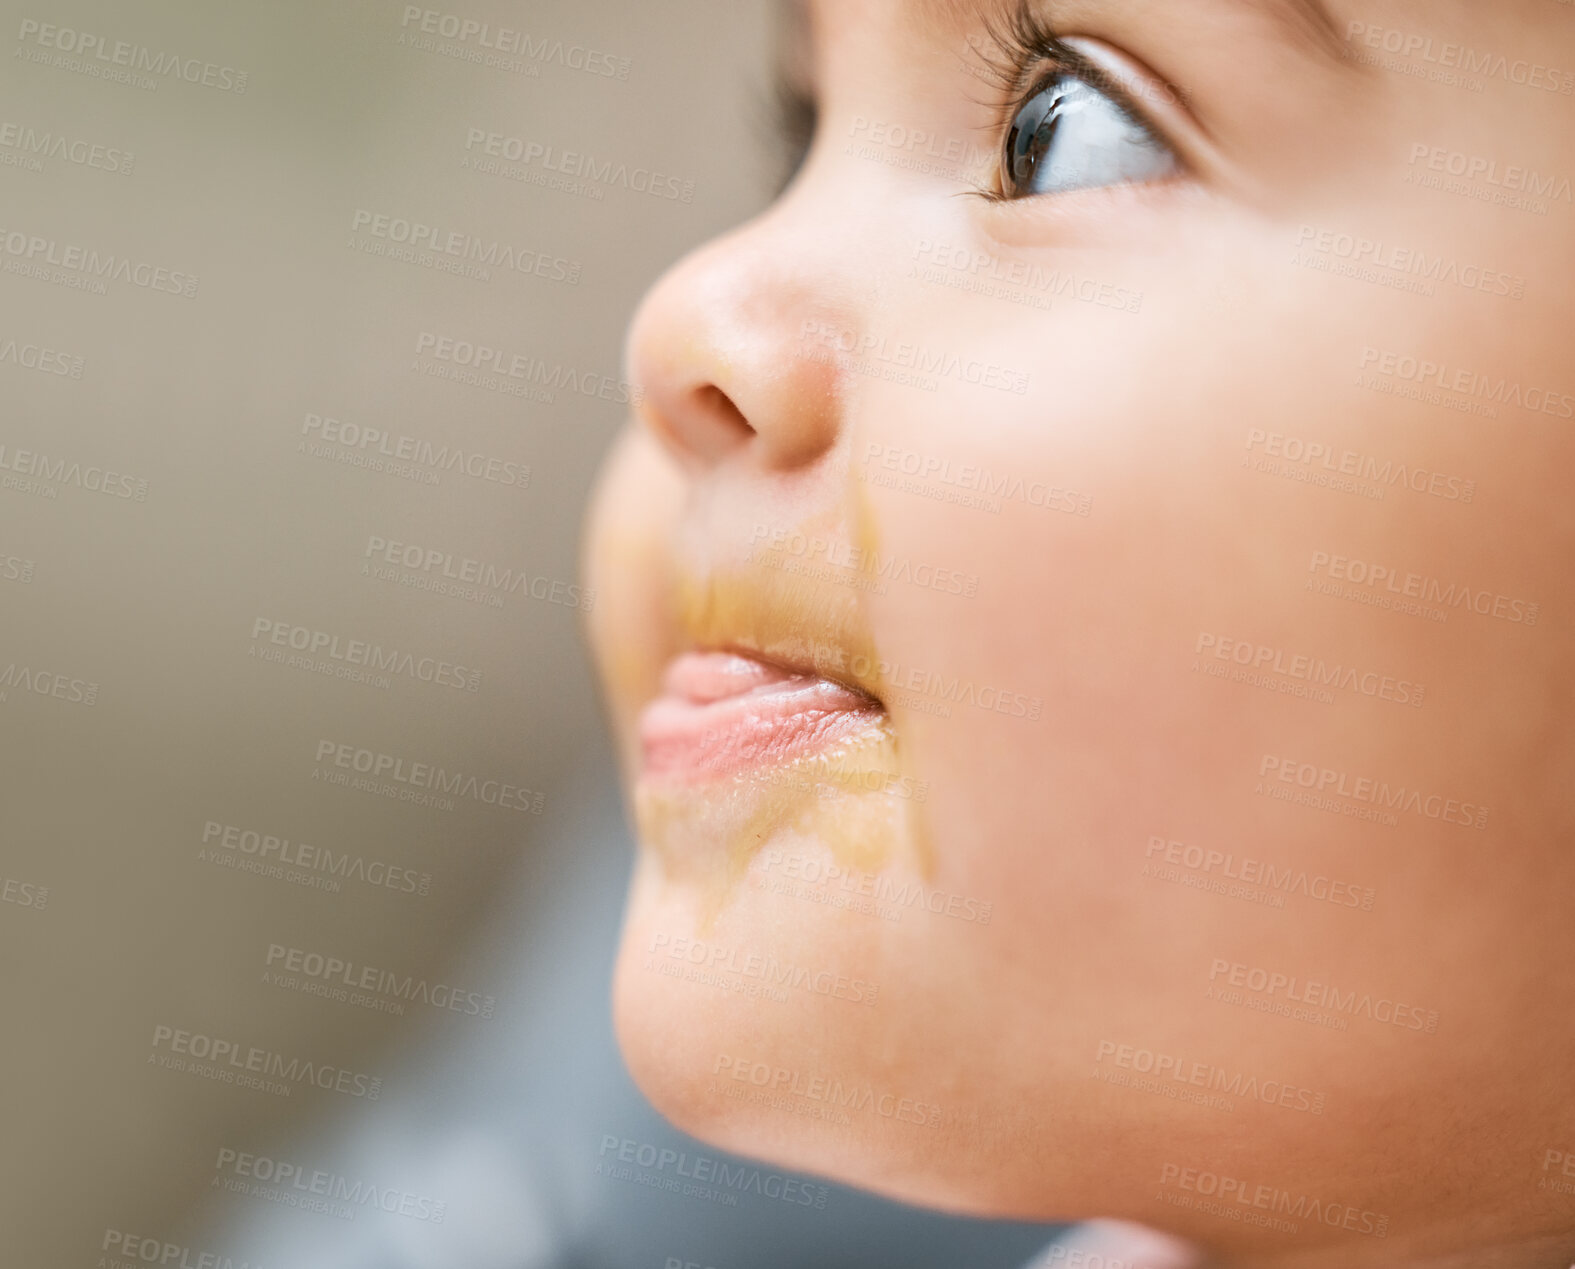 Buy stock photo Shot of an adorable baby girl's mouth covered with baby food